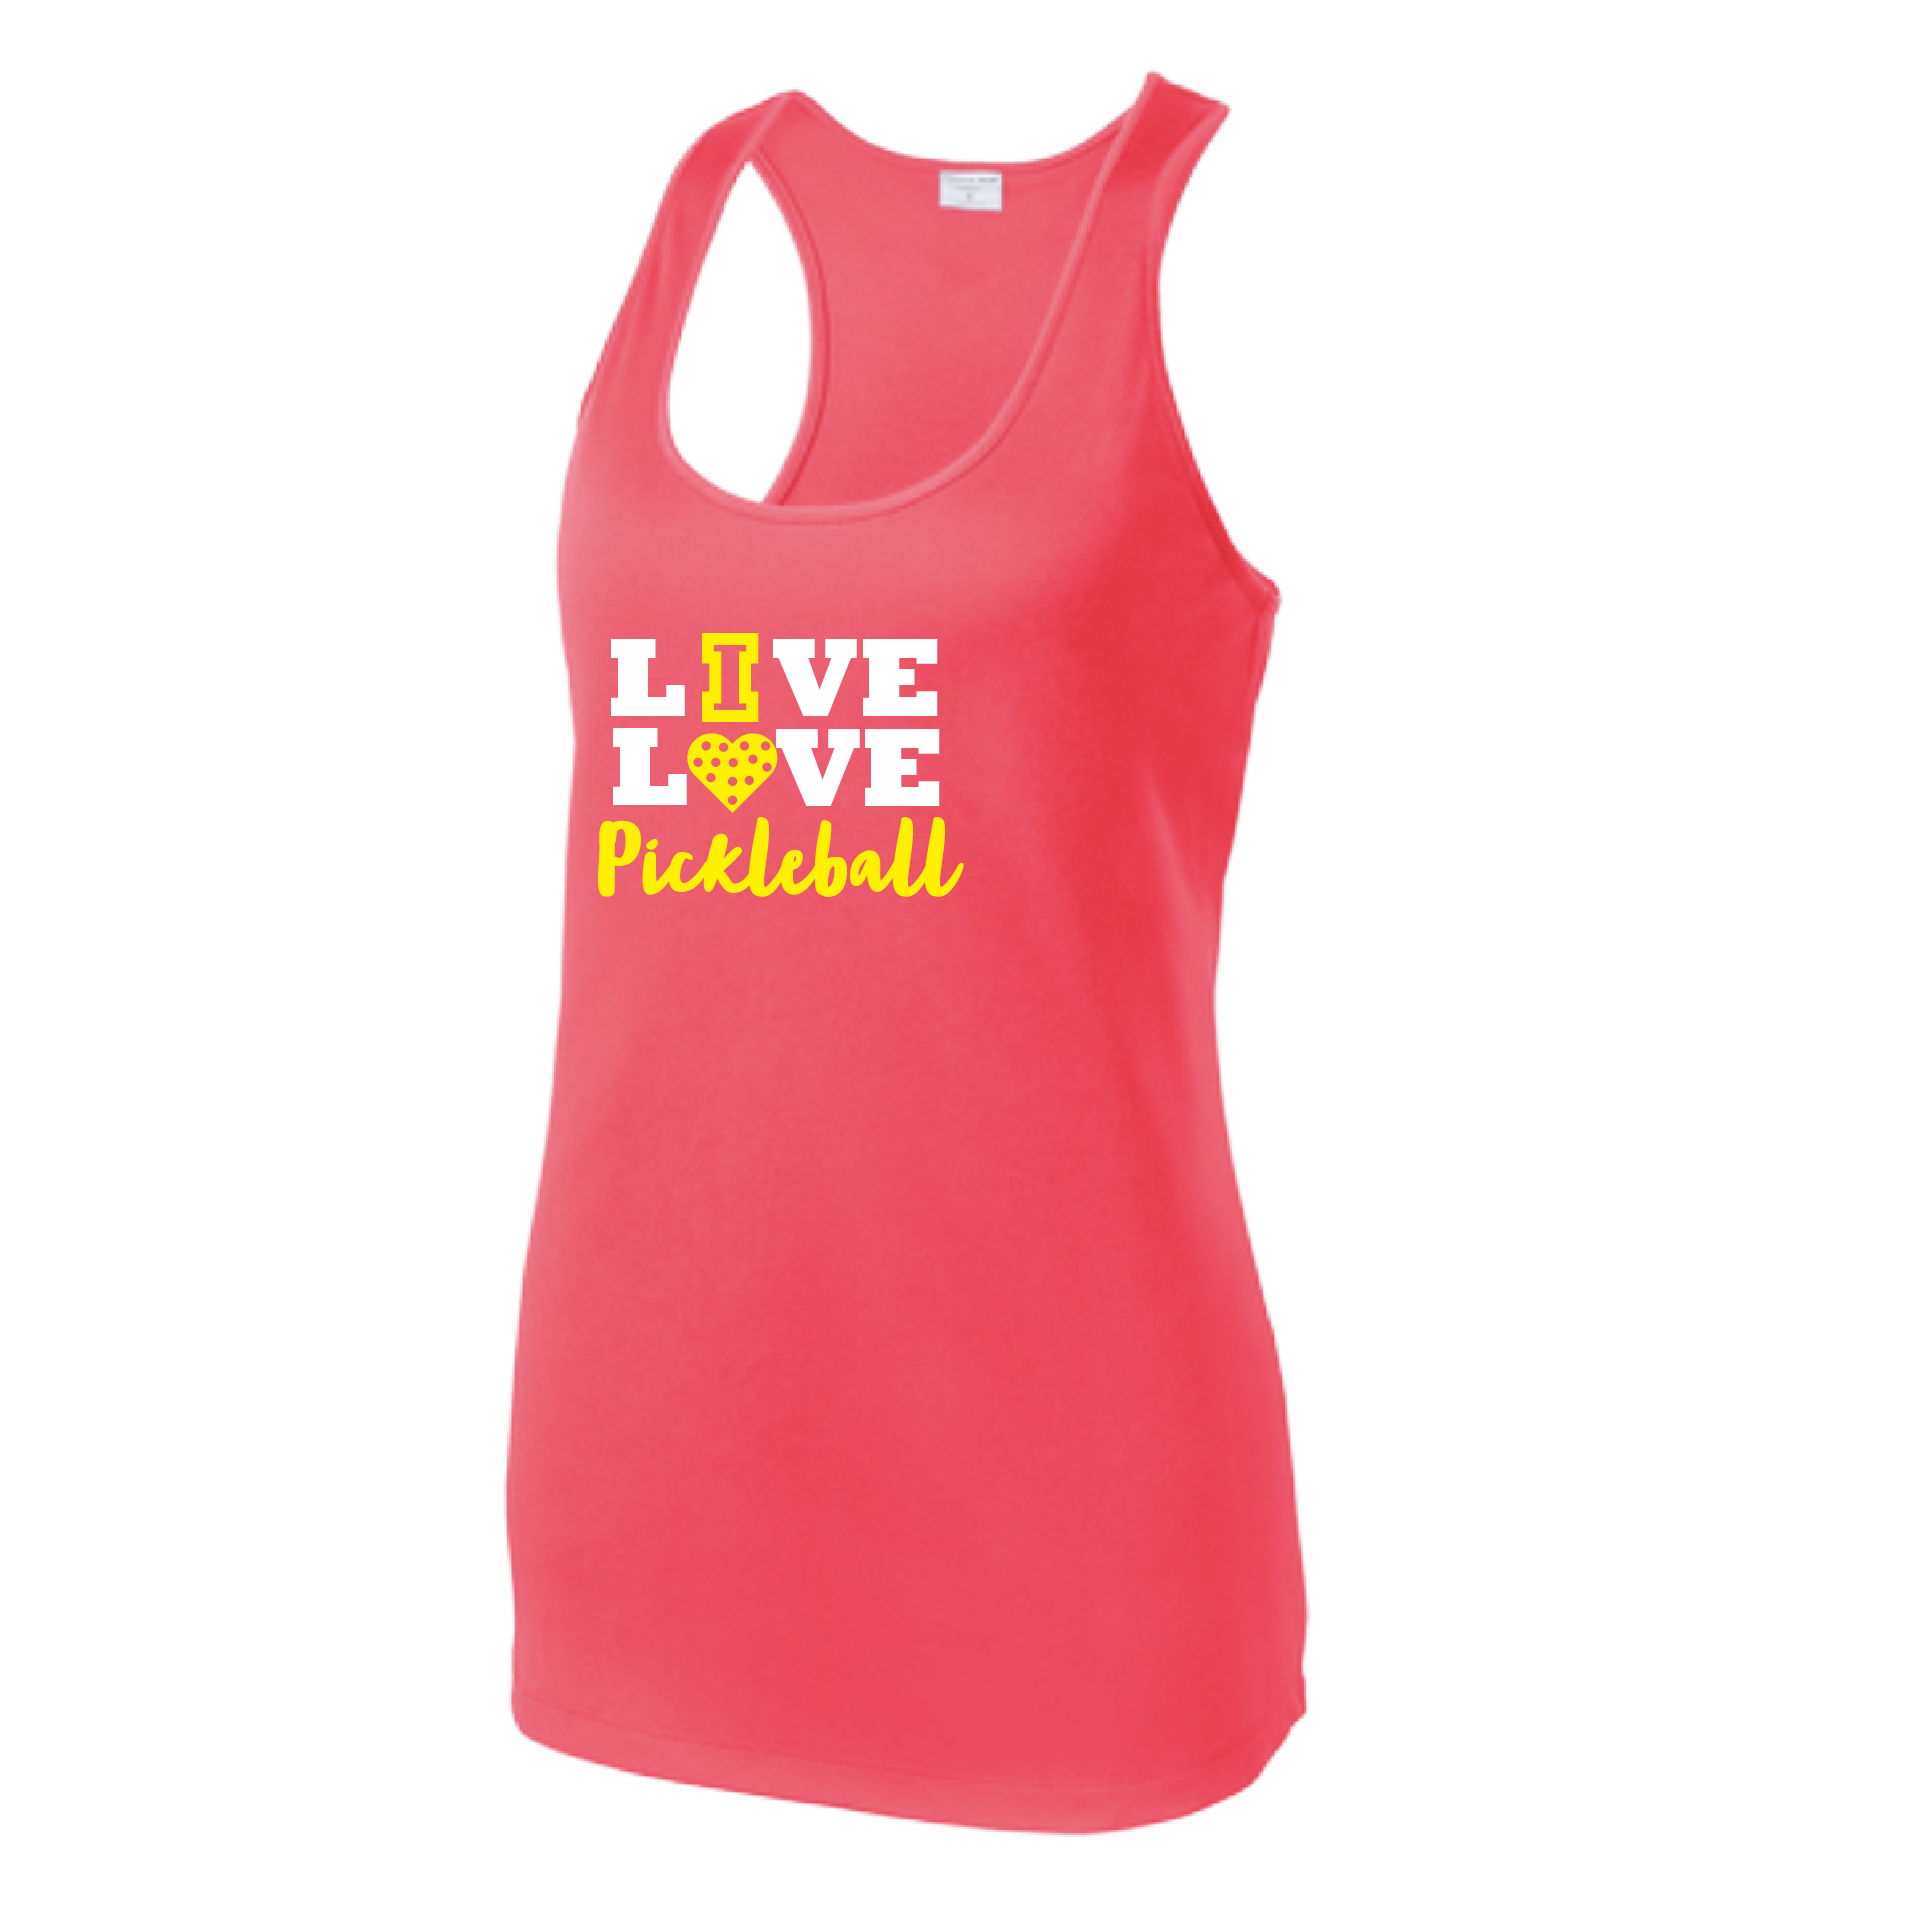 Pickleball Design: Live Love Pickleball  Women's Styles: Racerback Tank  Turn up the volume in this Women's shirt with its perfect mix of softness and attitude. Material is ultra-comfortable with moisture wicking properties and tri-blend softness. PosiCharge technology locks in color. Highly breathable and lightweight.